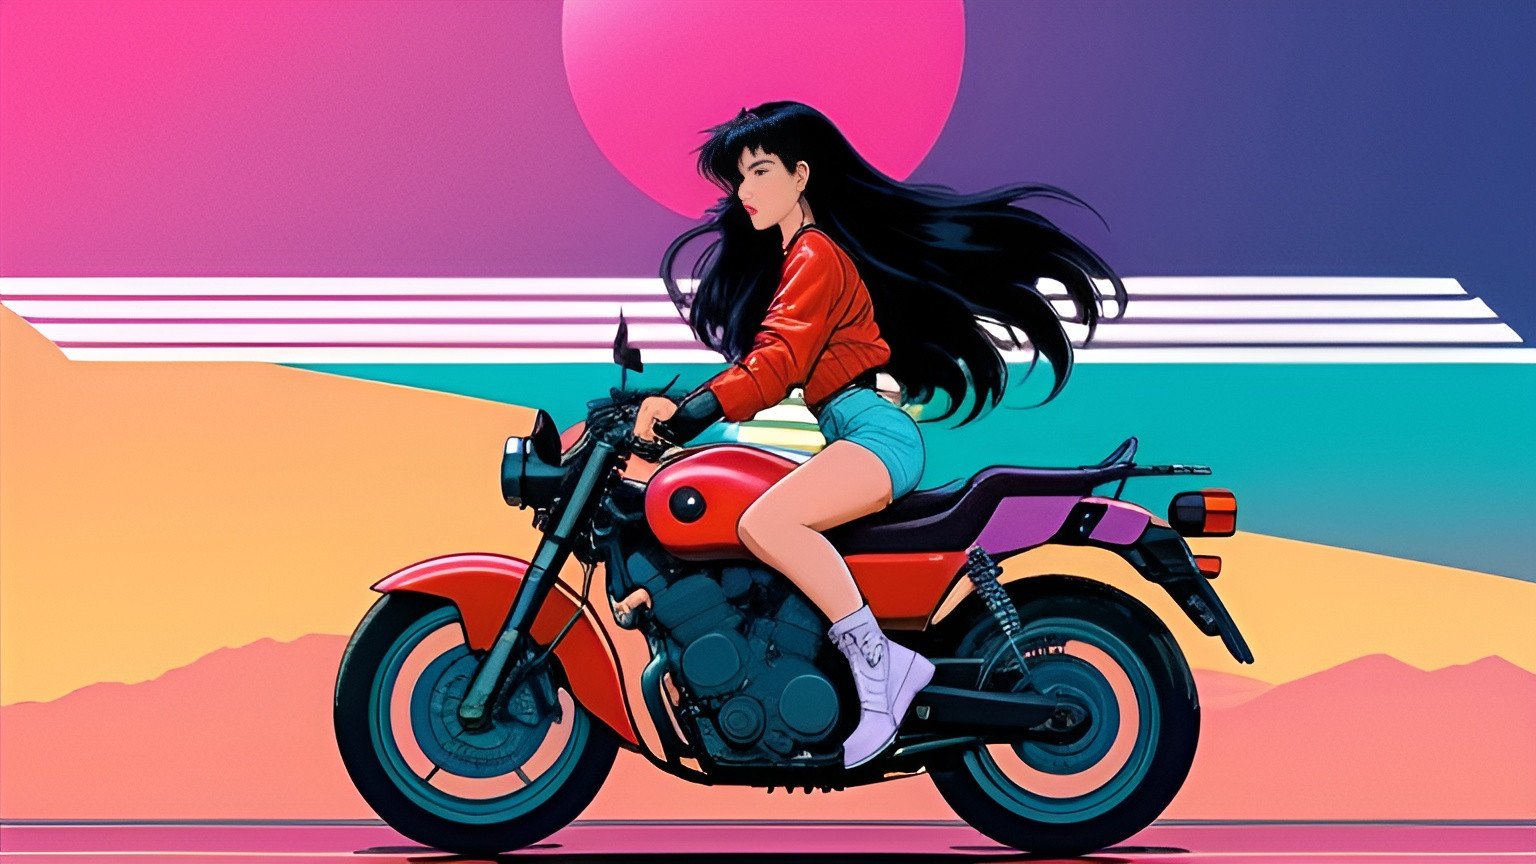 Anime girl and her motorcycle by MauryArt5 on DeviantArt